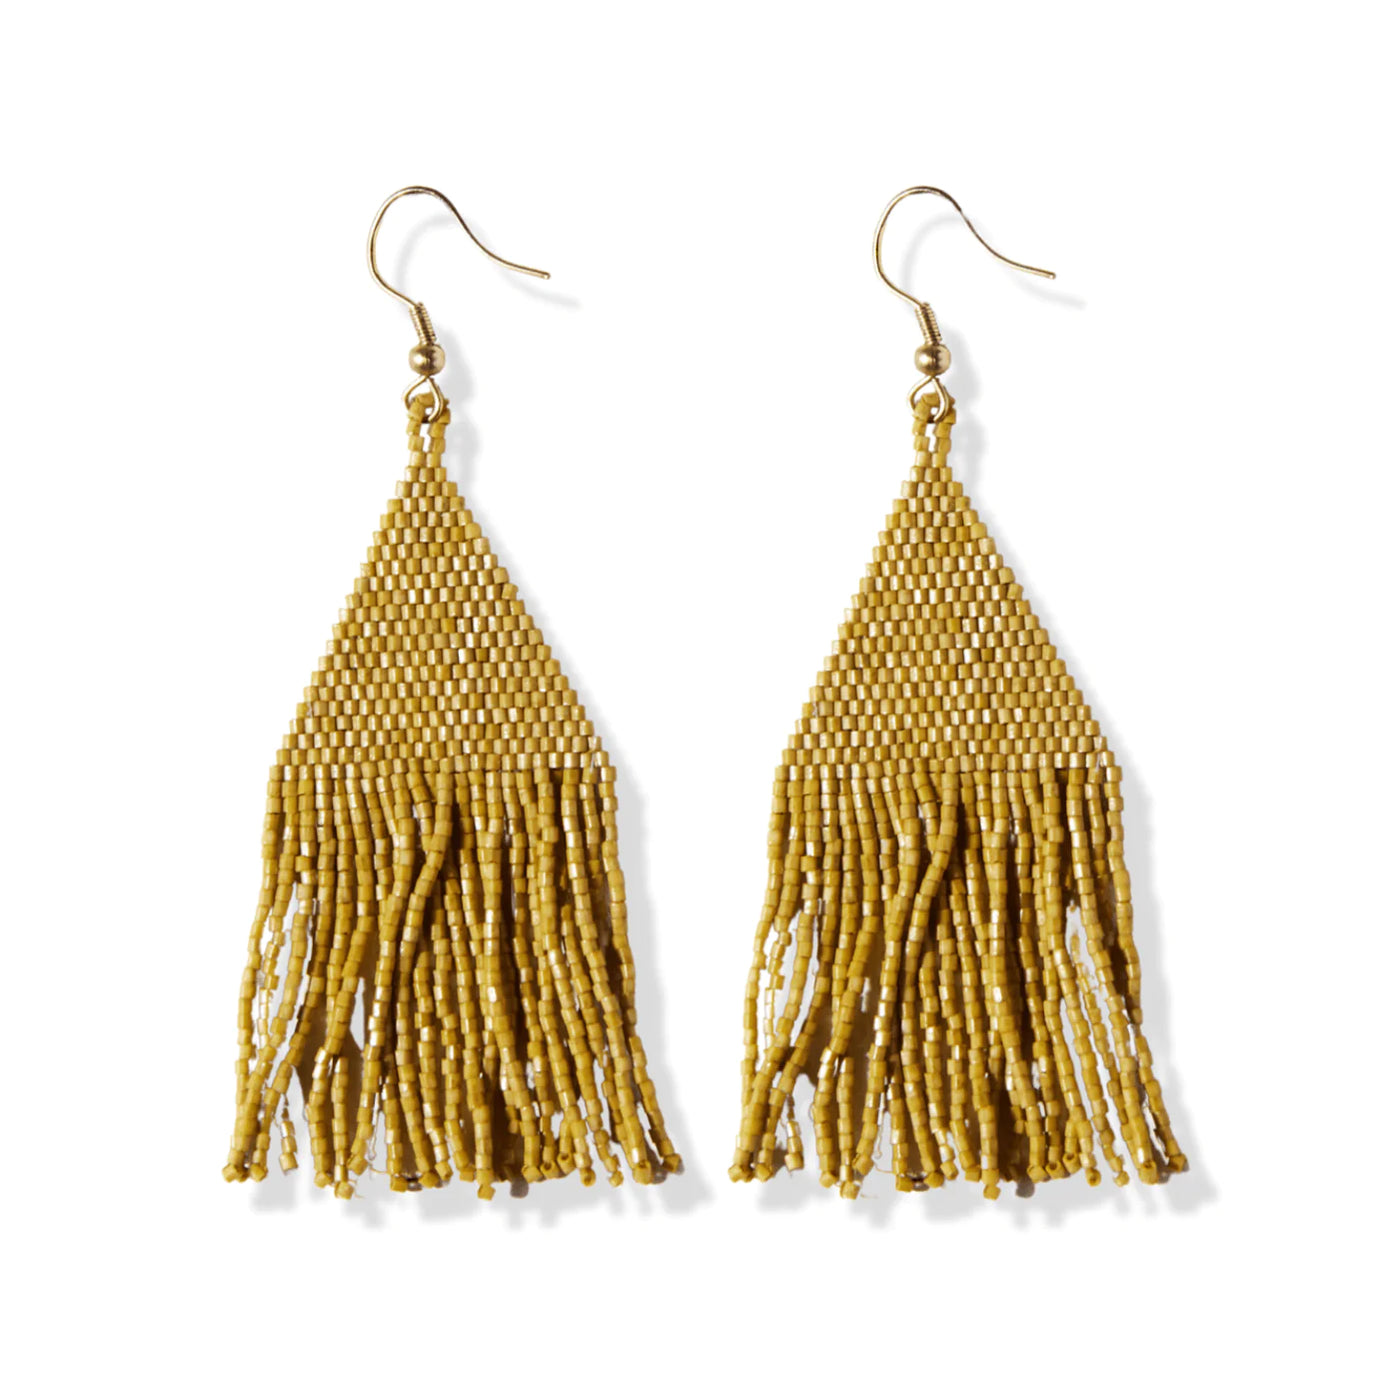 Lexie Solid Beaded Fringe Earrings in gold on white background, front view.